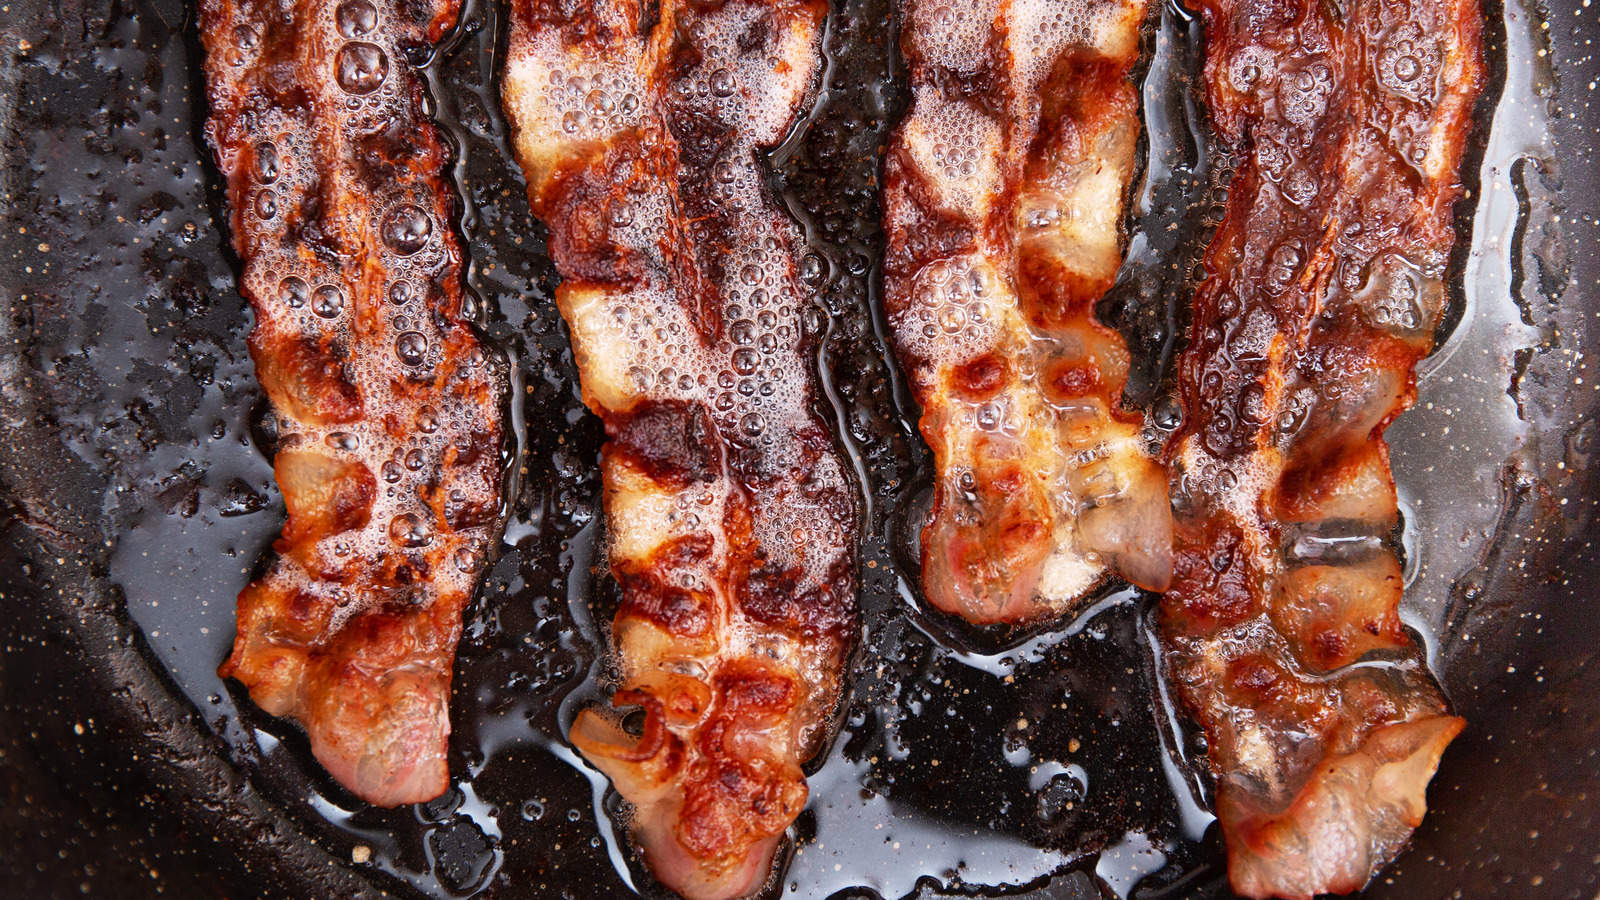 https://www.tastingtable.com/img/gallery/why-you-should-stop-throwing-out-bacon-grease/l-intro-1657039161.jpg